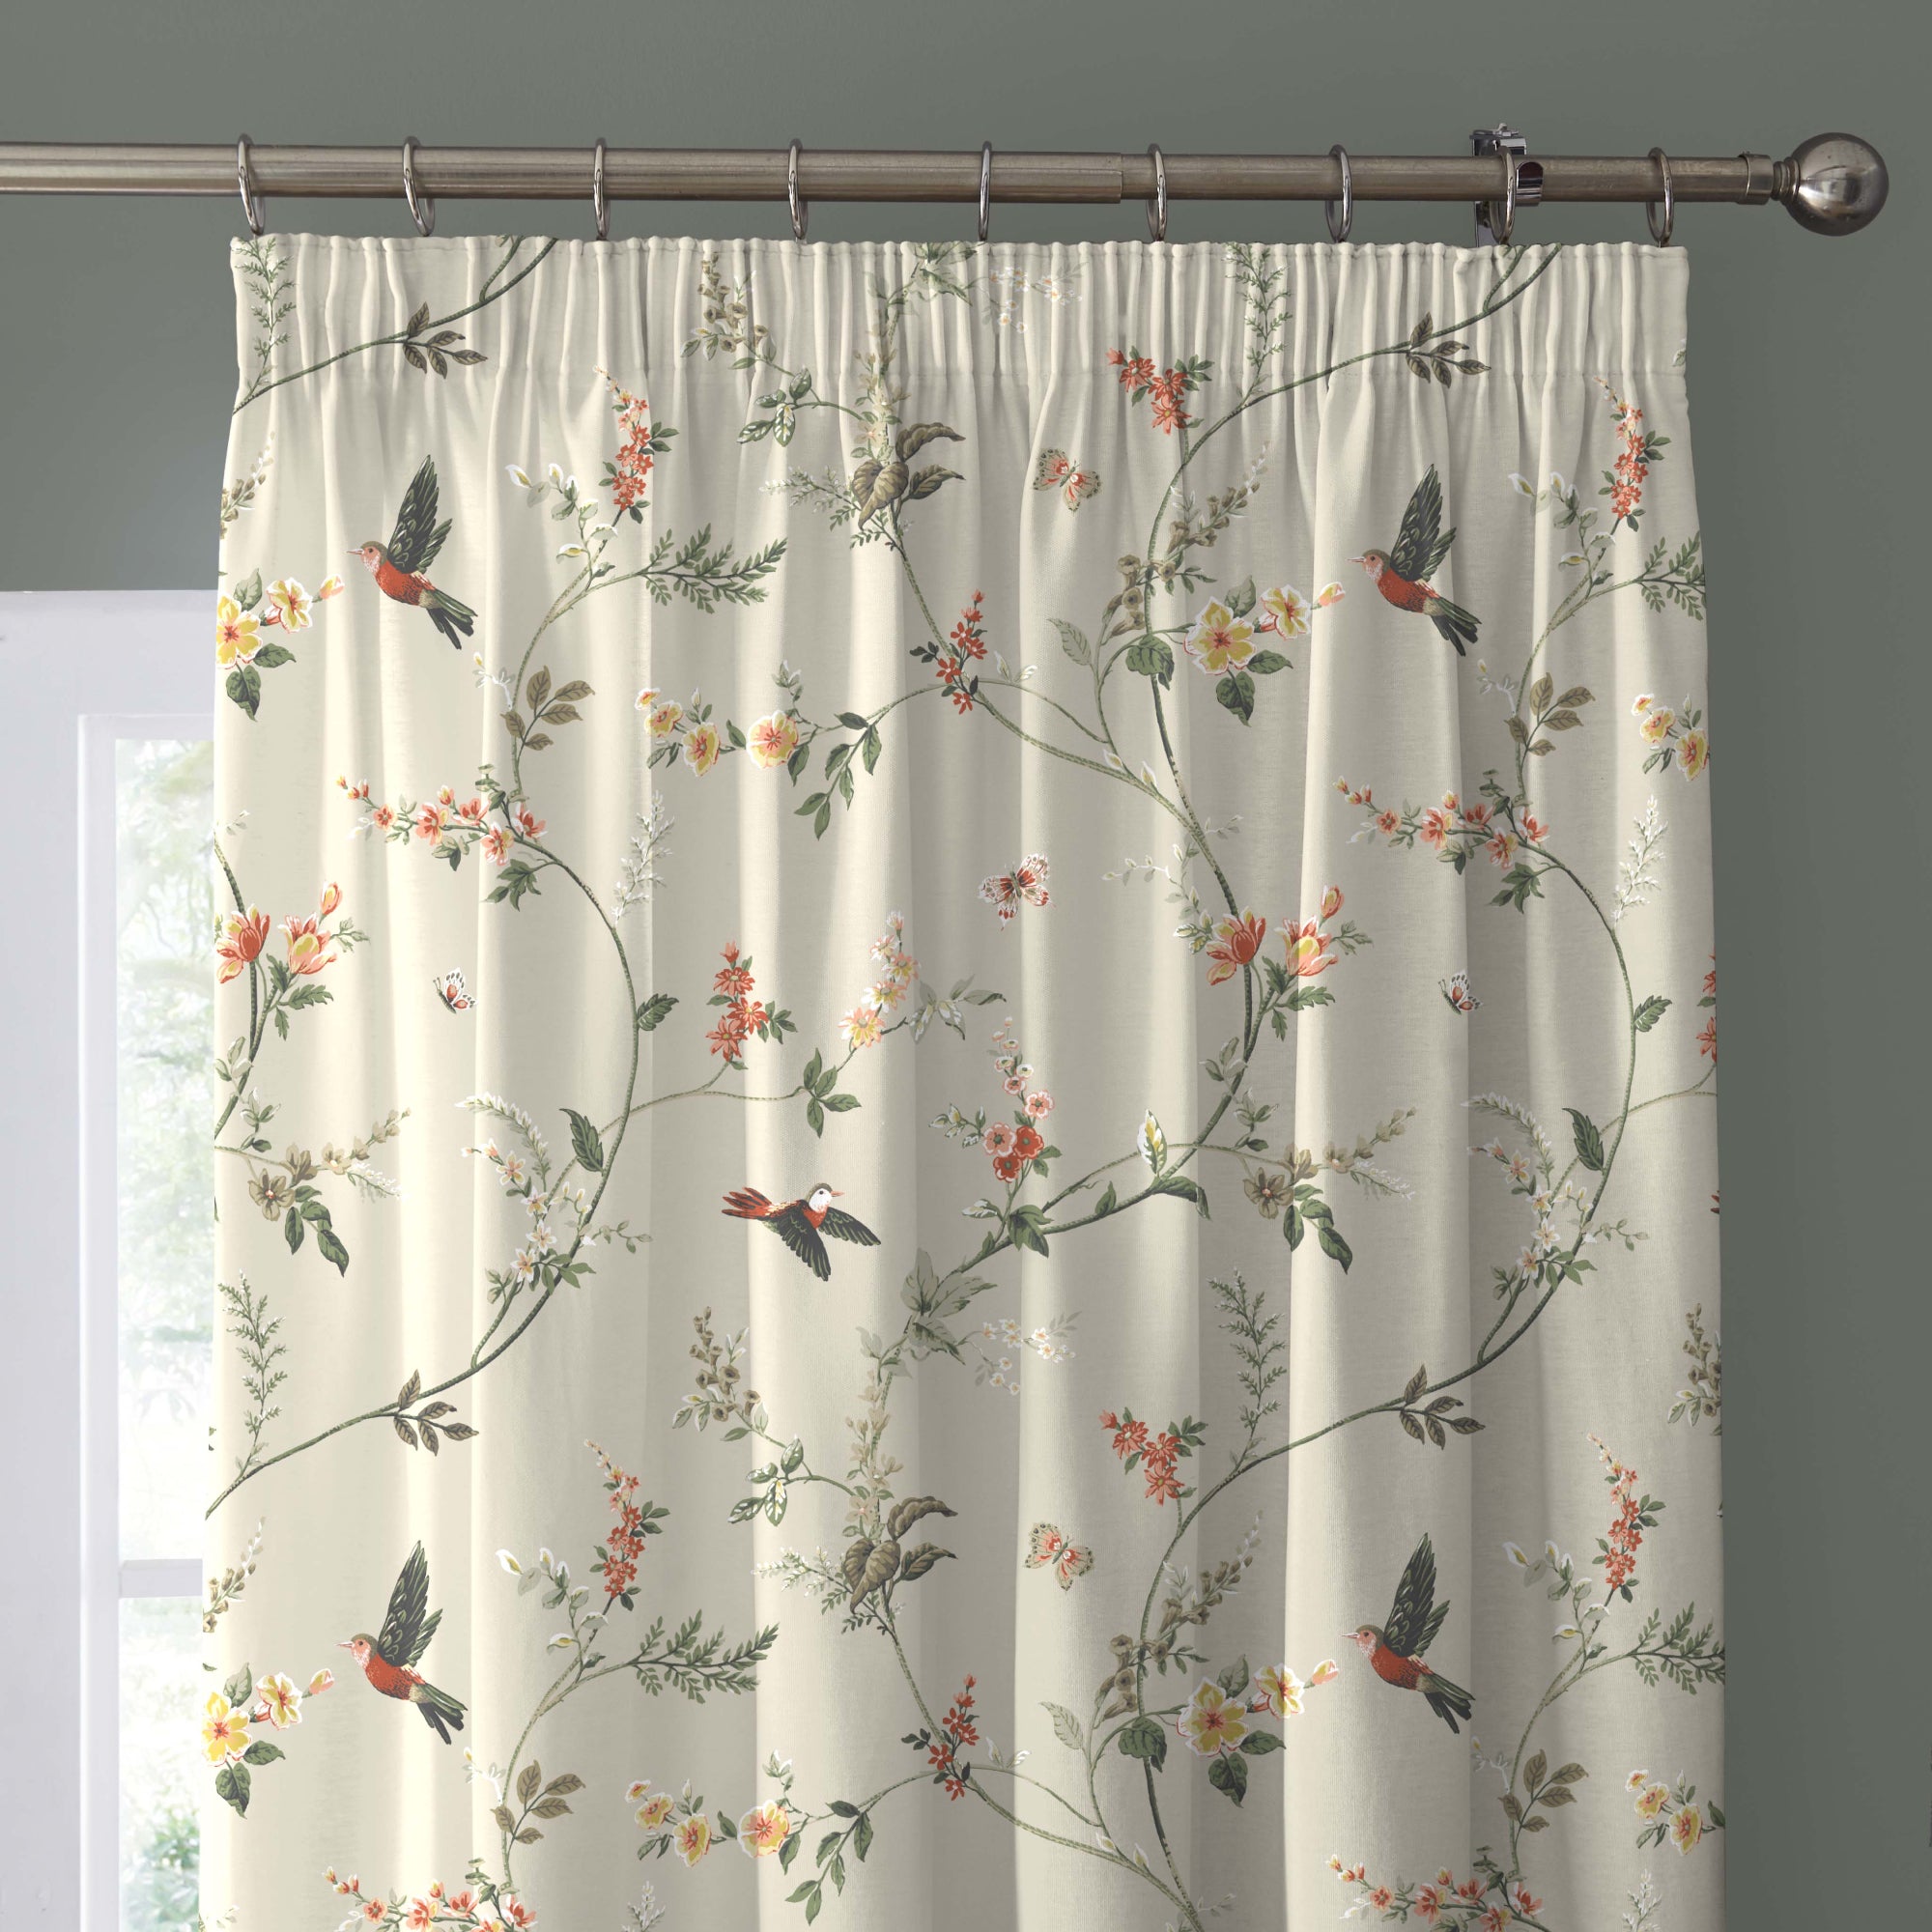 Pair of Pencil Pleat Curtains With Tie-Backs Darnley by Dreams & Drapes Curtains in Coral/Natural